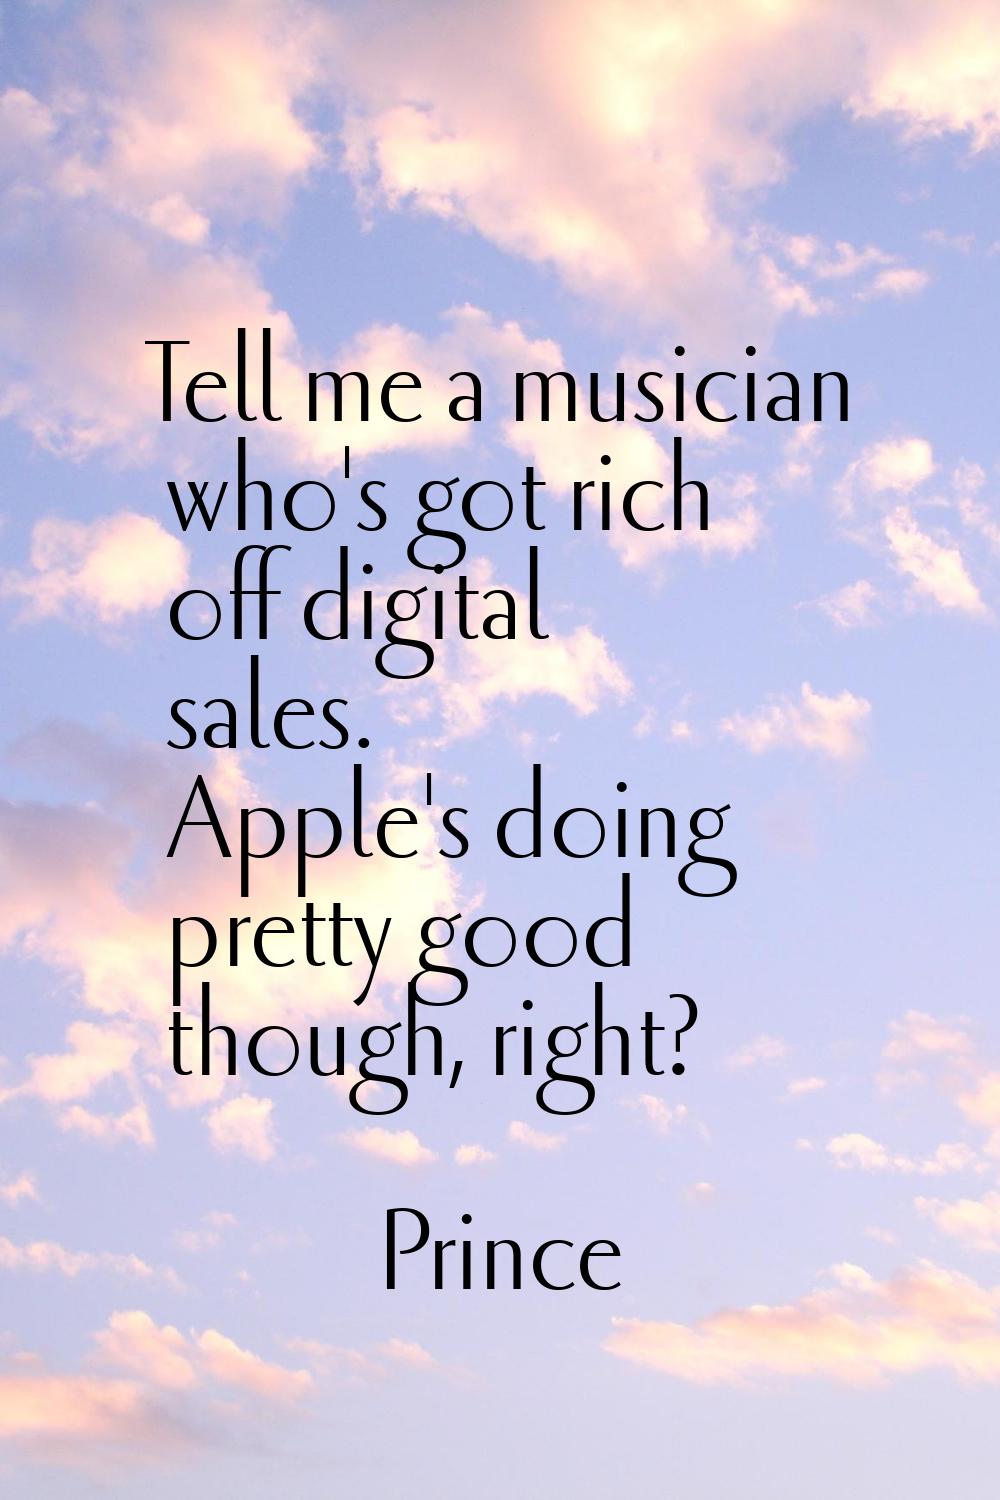 Tell me a musician who's got rich off digital sales. Apple's doing pretty good though, right?